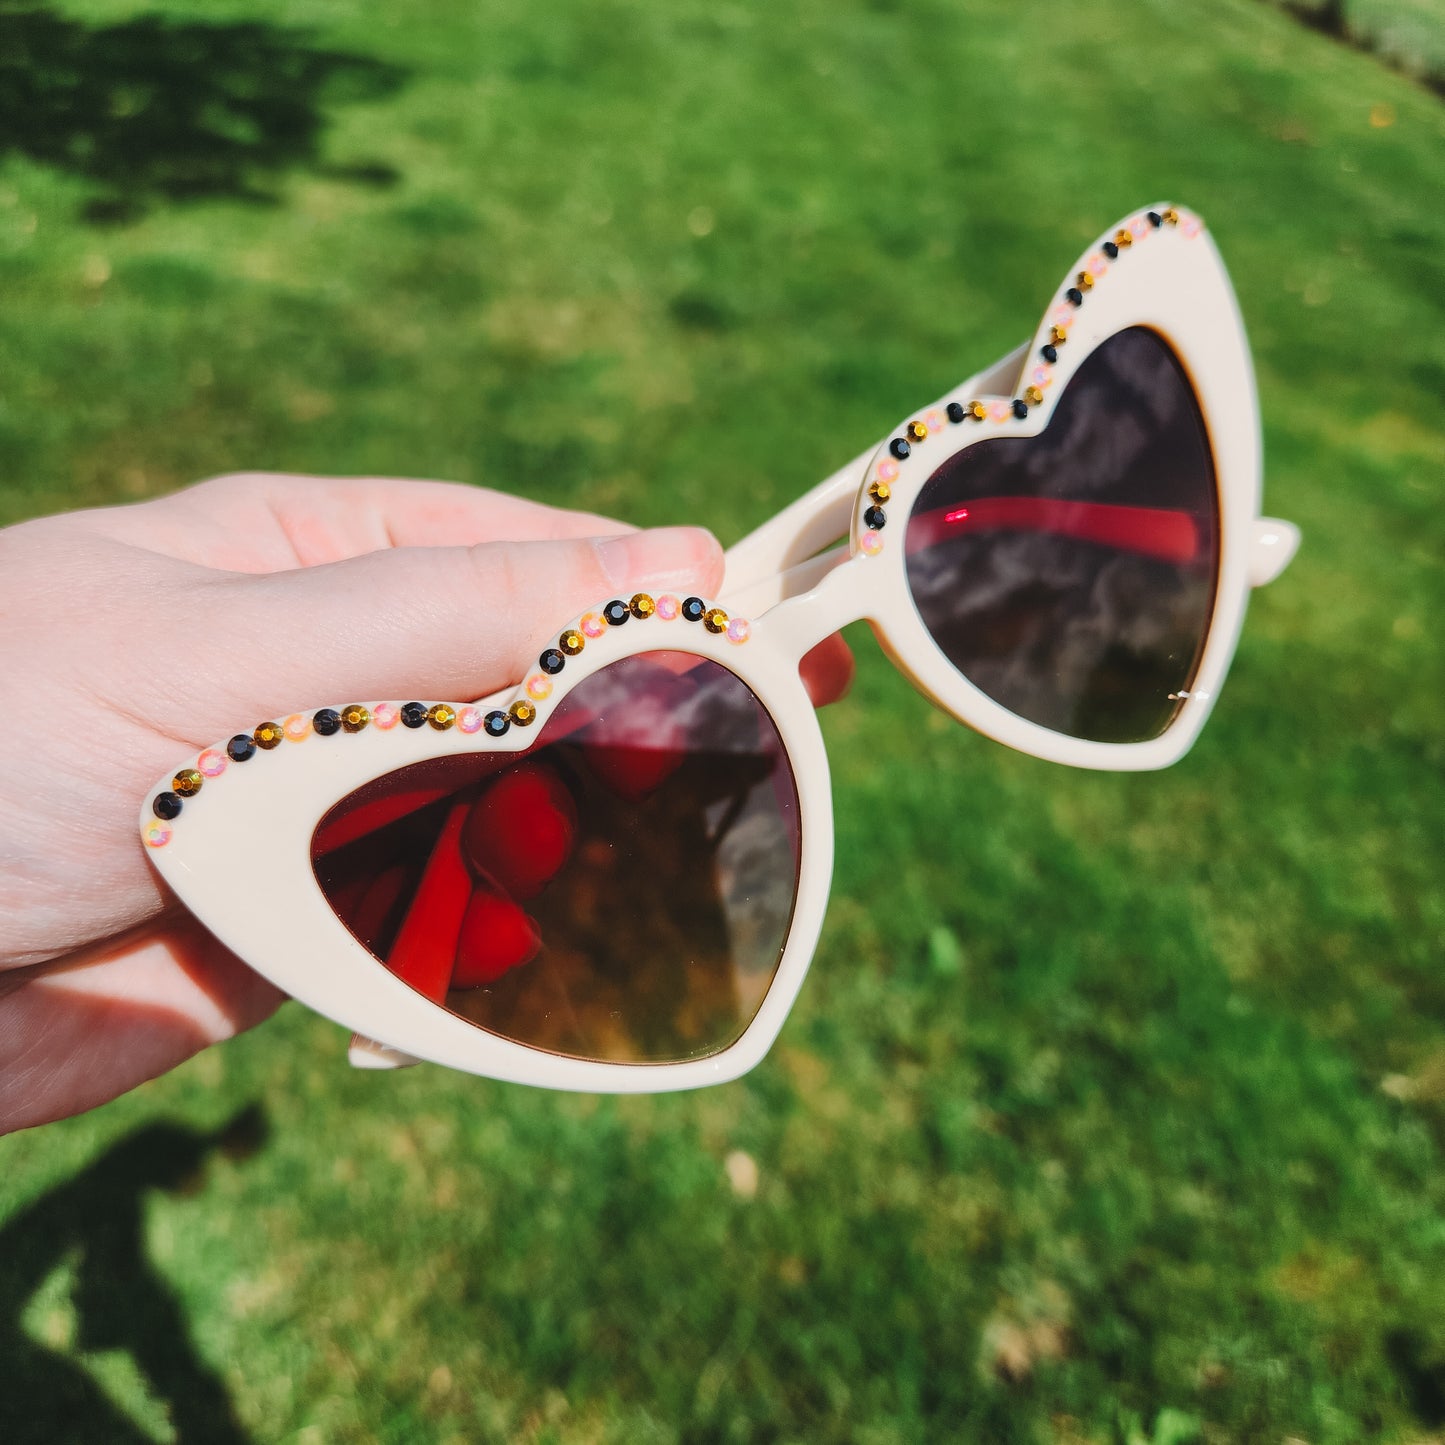 Ivory Heart Shaped Sunnies with Black, Gold, and Multicolor Rhinestone Accents